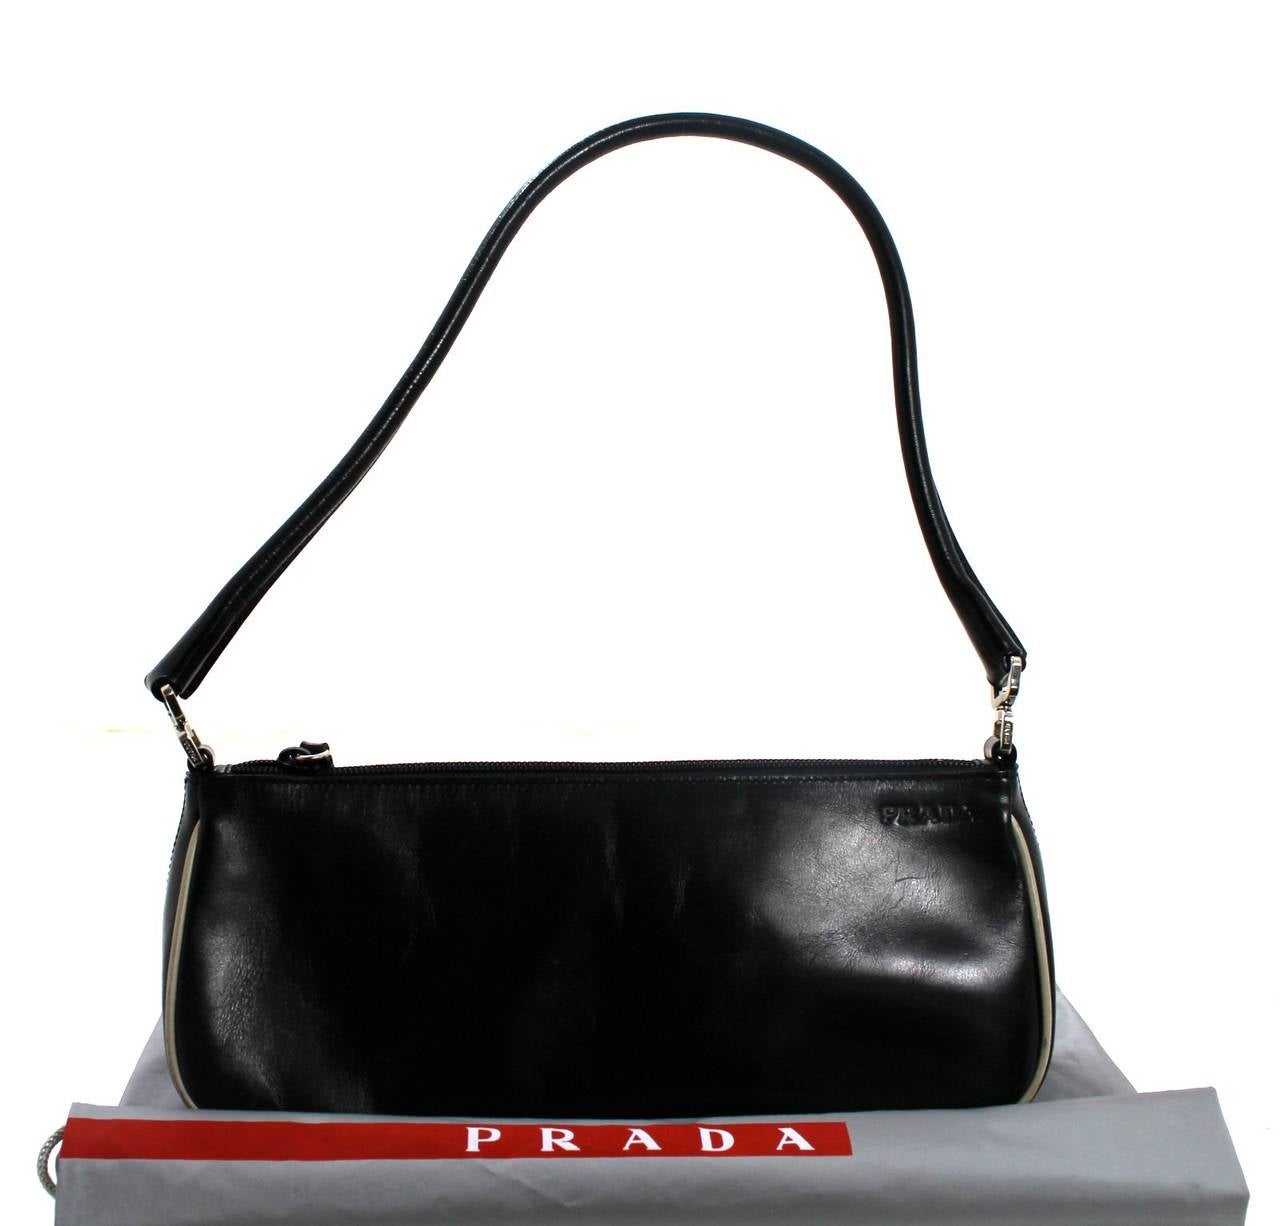 A fantastic find for a savvy shopper, this Black Leather Pochette from Prada is in very good condition.  The exterior is excellent with the signs of wear mainly on the corner piping. The interior is mint. Simply designed, it easily transitions to